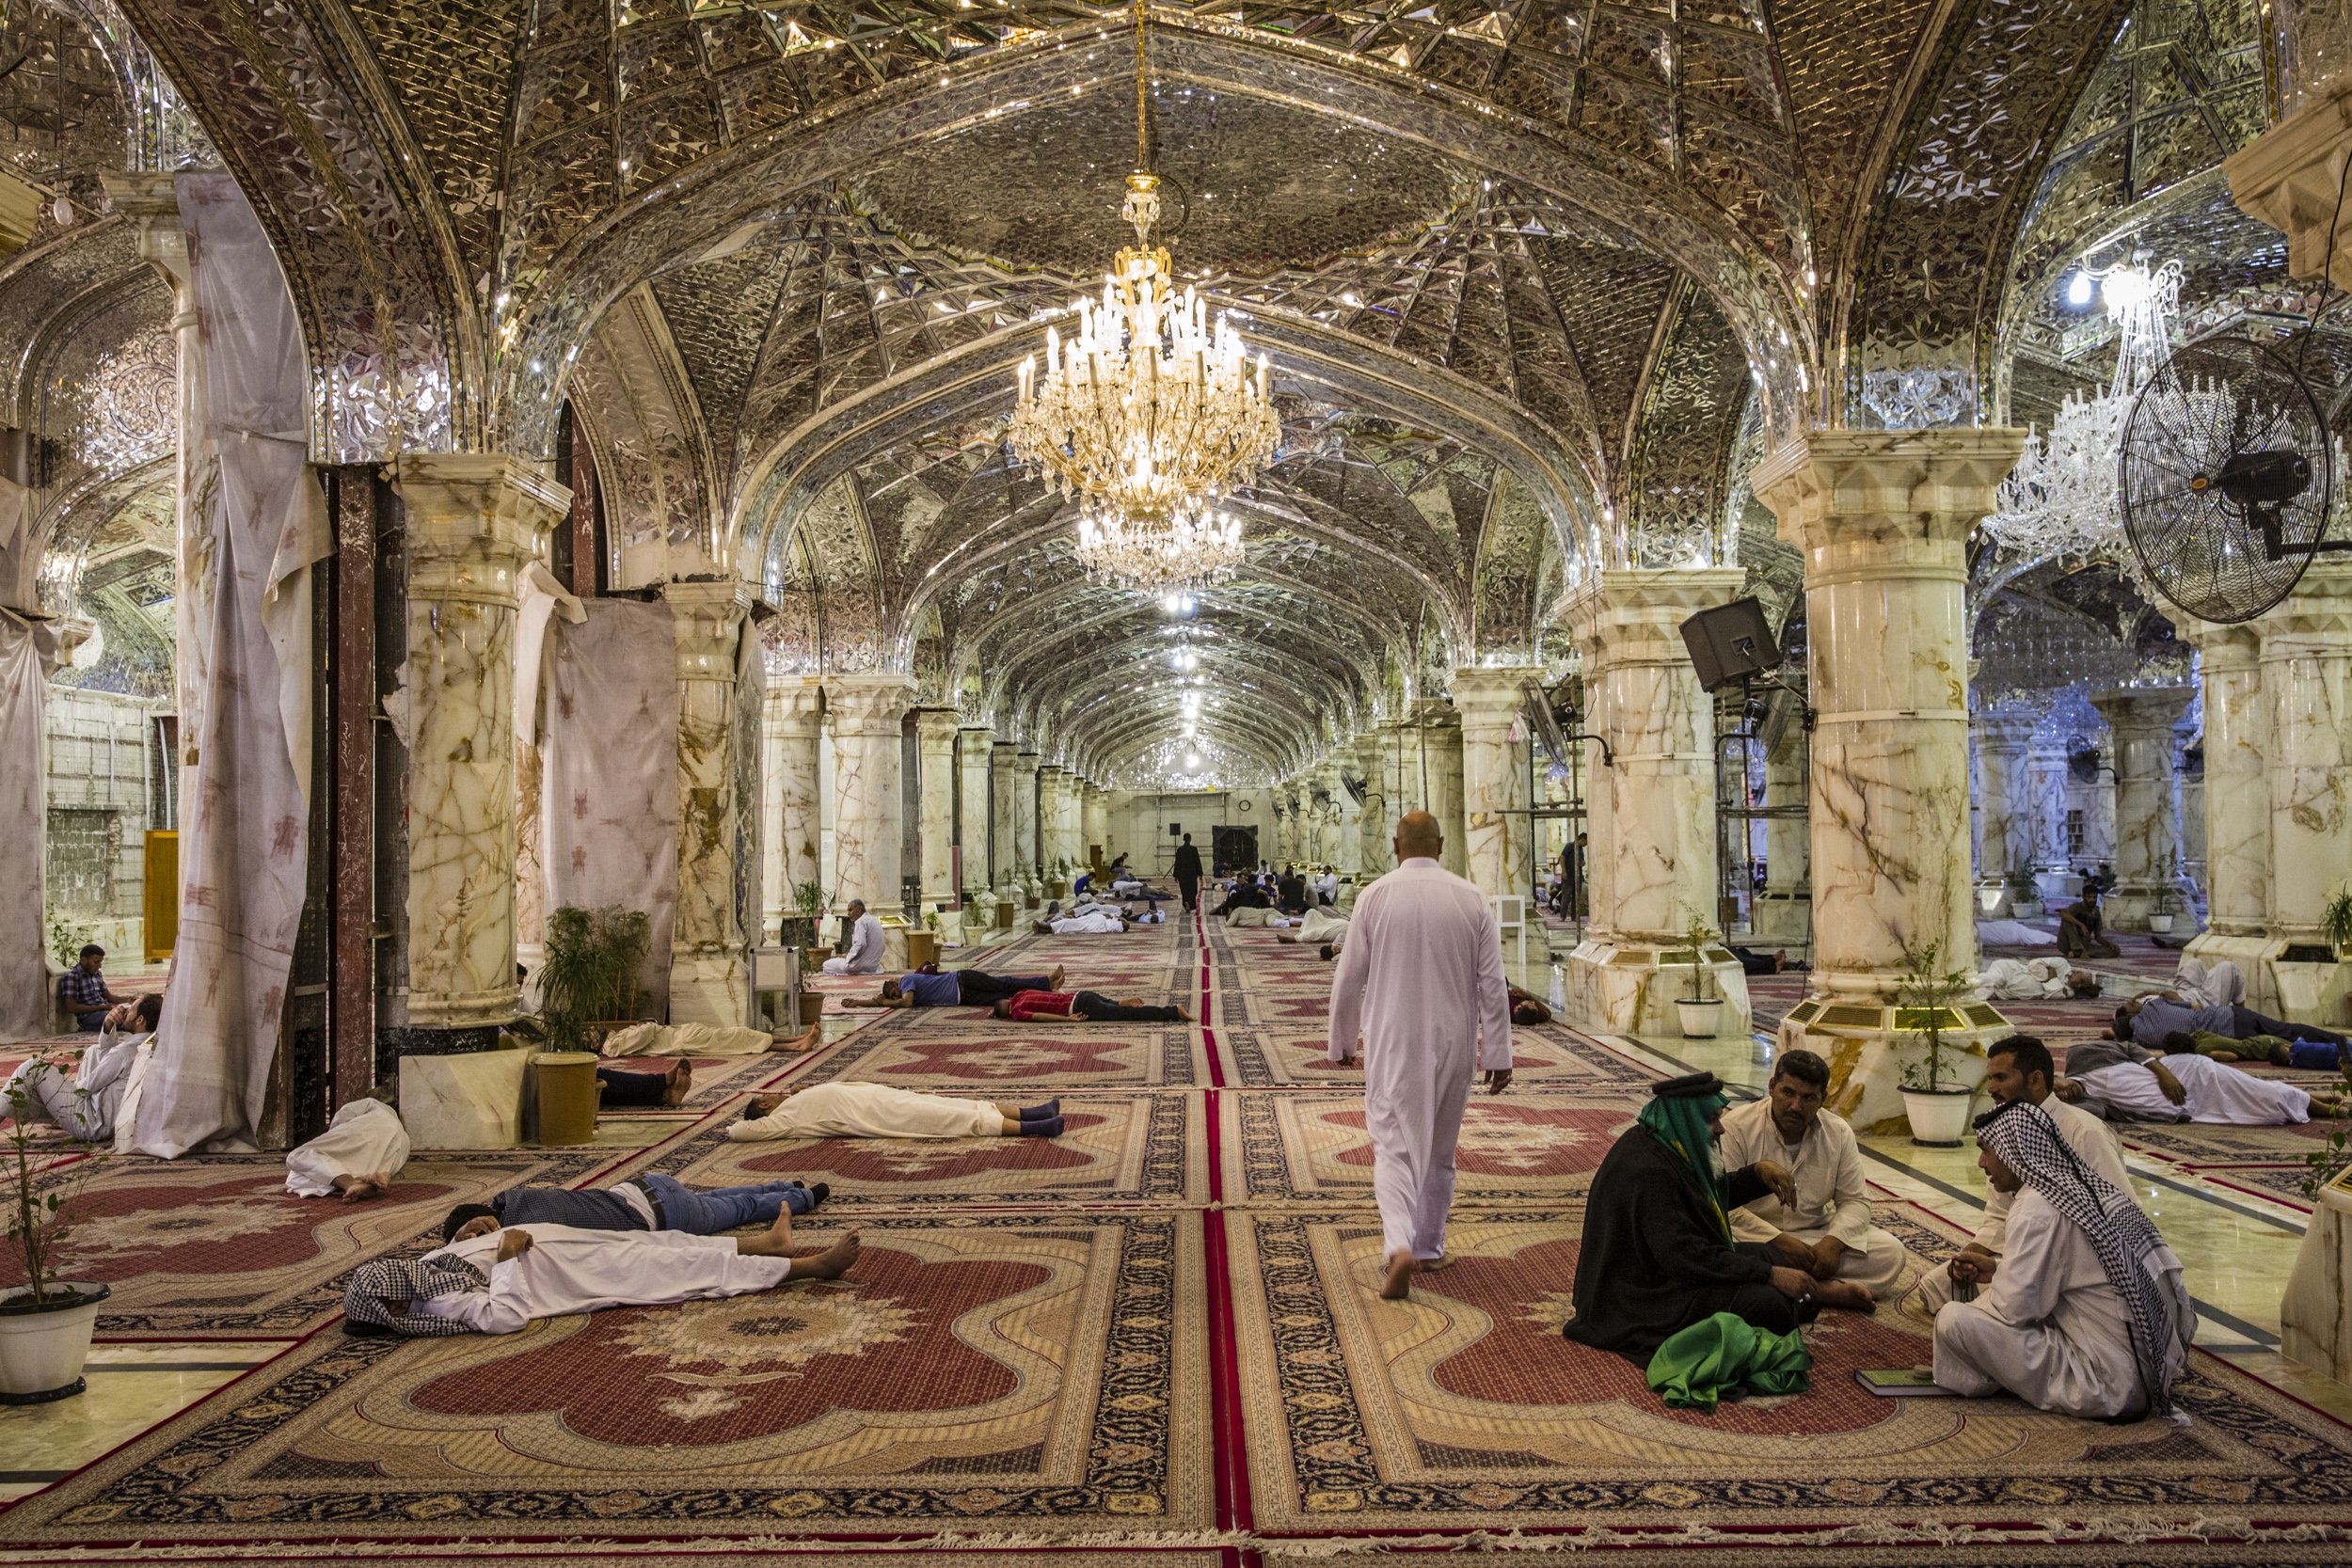  Shiite pilgrims slept and talked inside one of the cavernous halls of the Shrine of Imam Ali, one of the holiest sites in Shia’ism in Najaf, Iraq. 